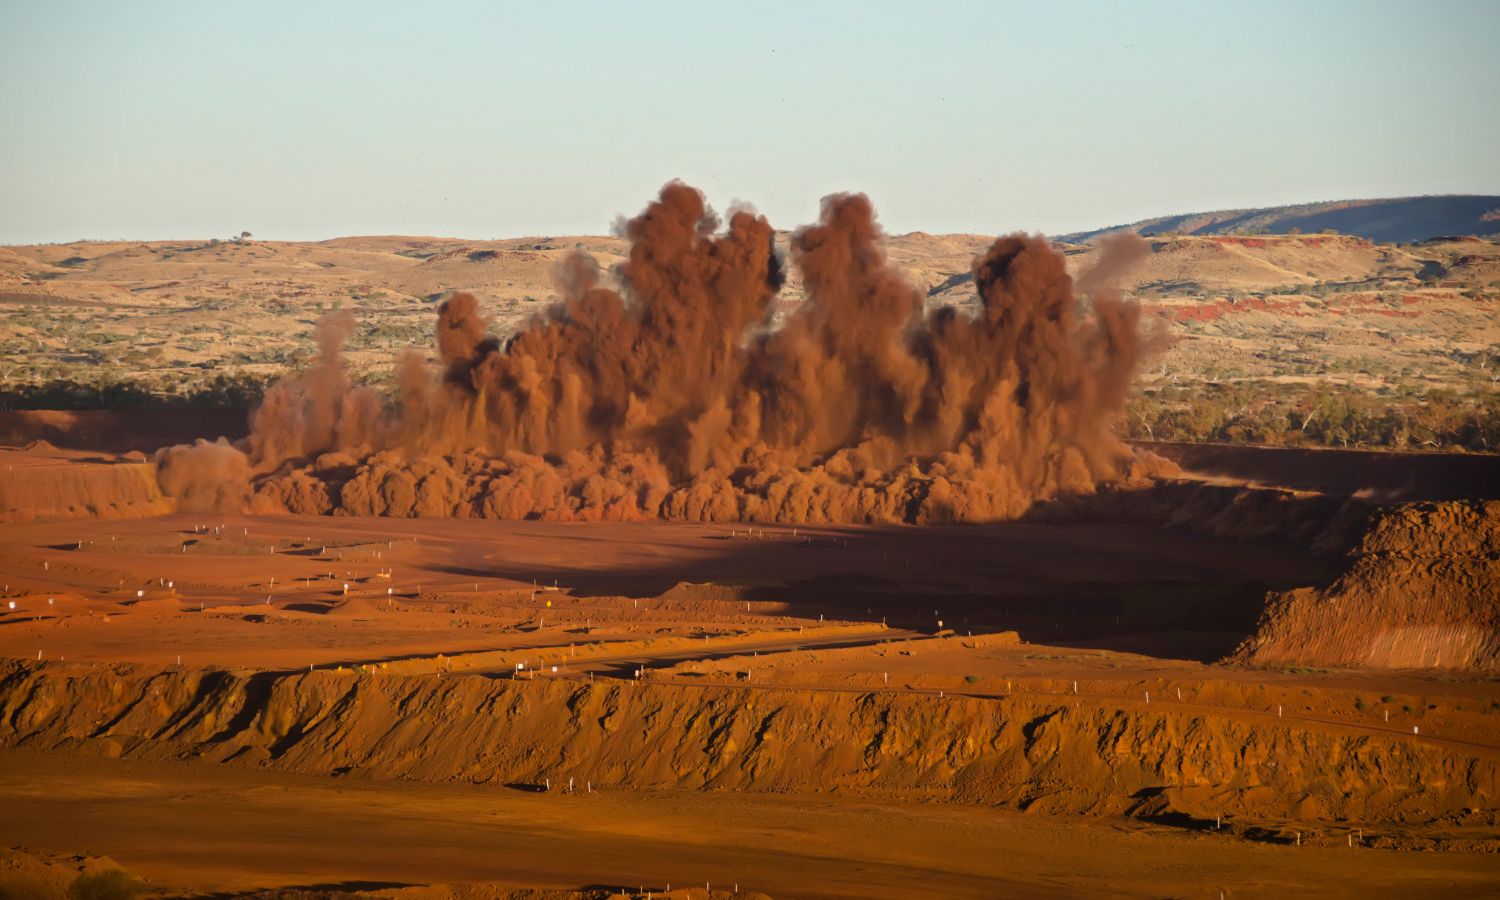 An image showing a mining explosion in Western Australia